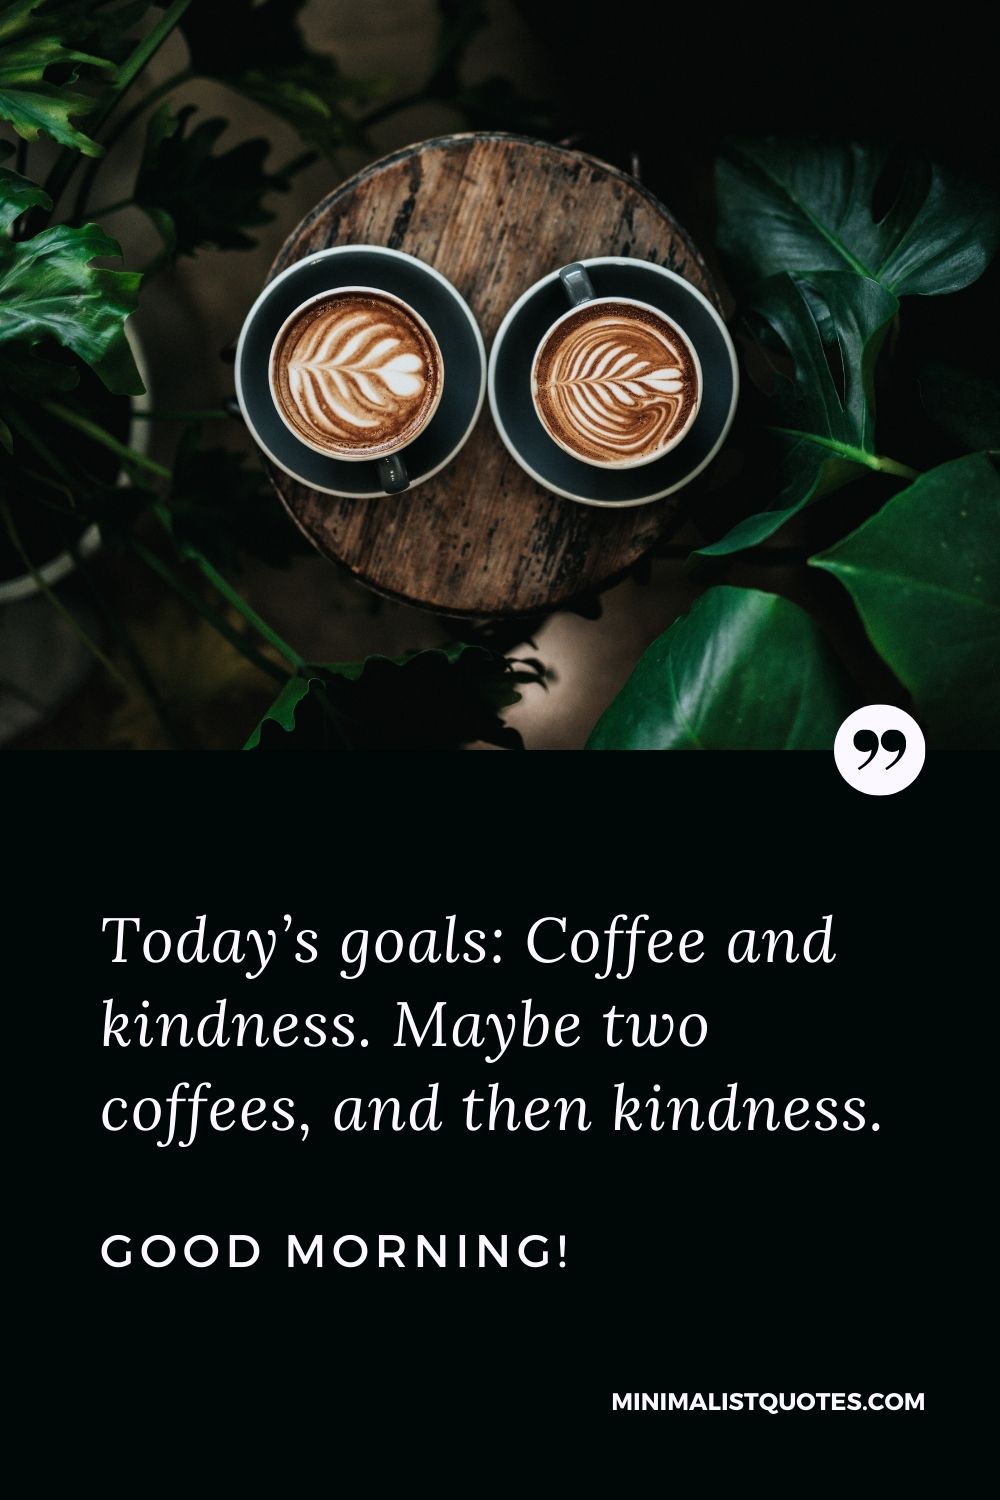 Good morning Funny quote & message: Today’s goals: Coffee and kindness. Maybe two coffees, and then kindness. Good Morning!